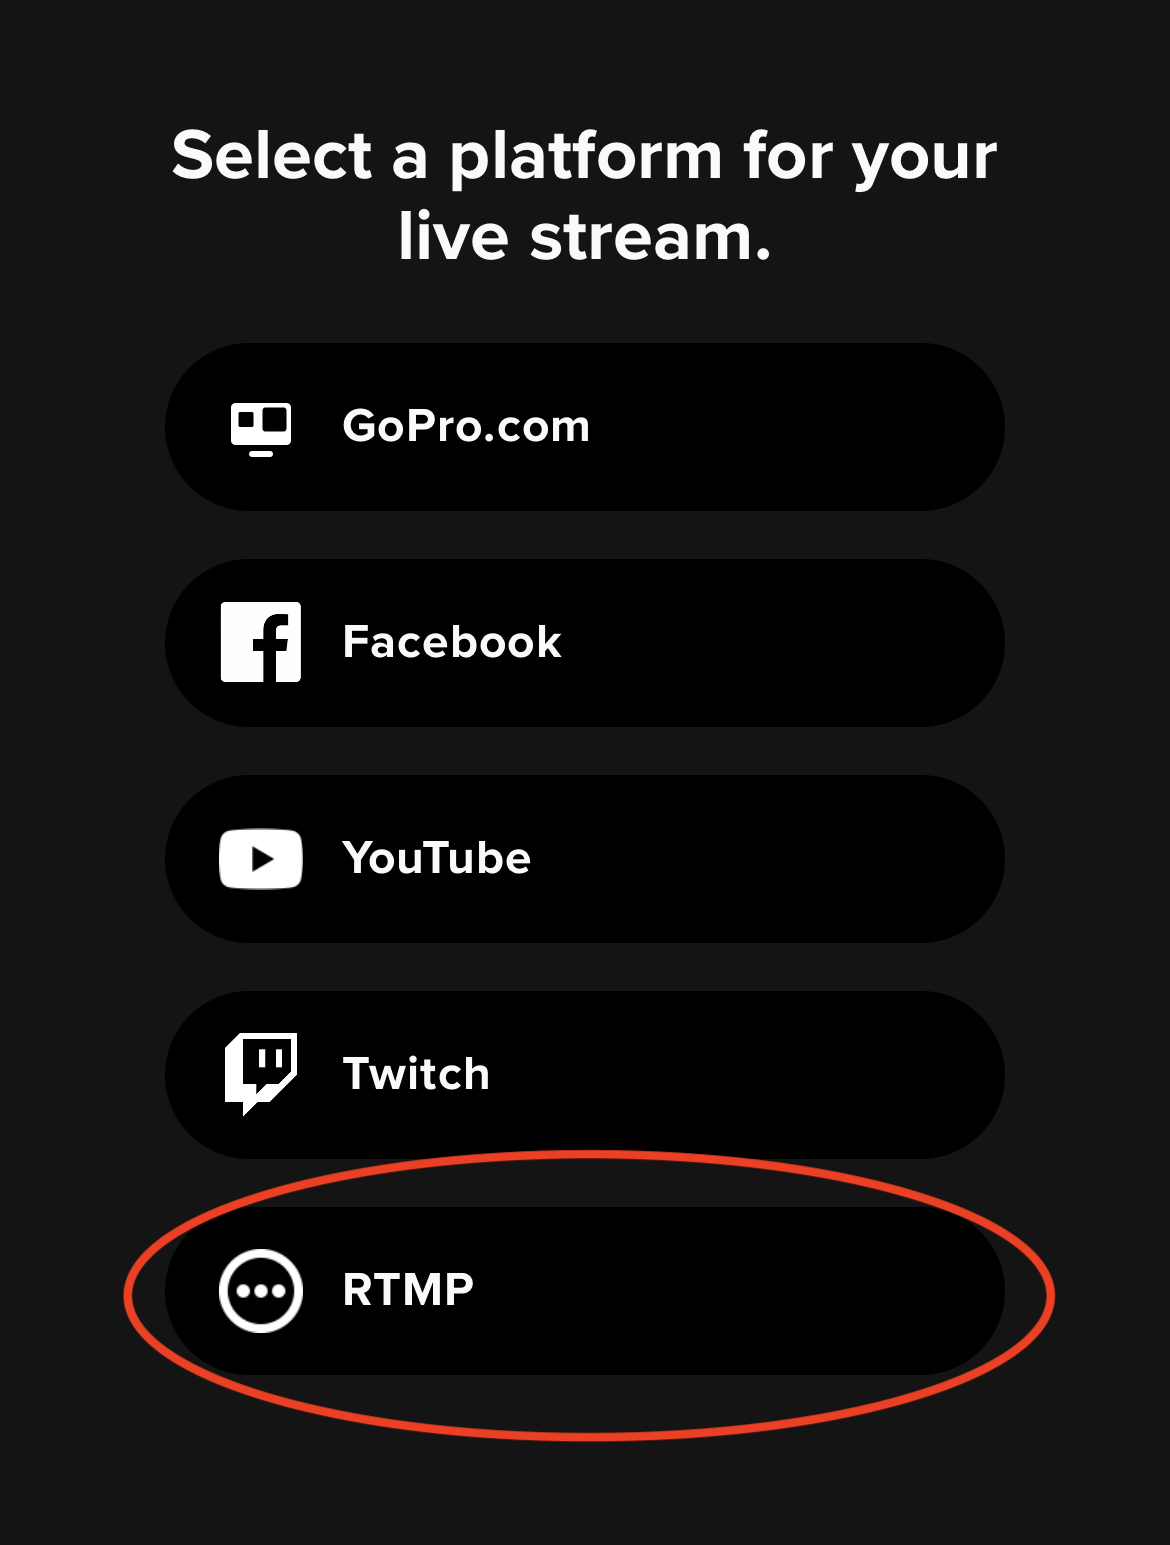 Choose RTMP for live stream